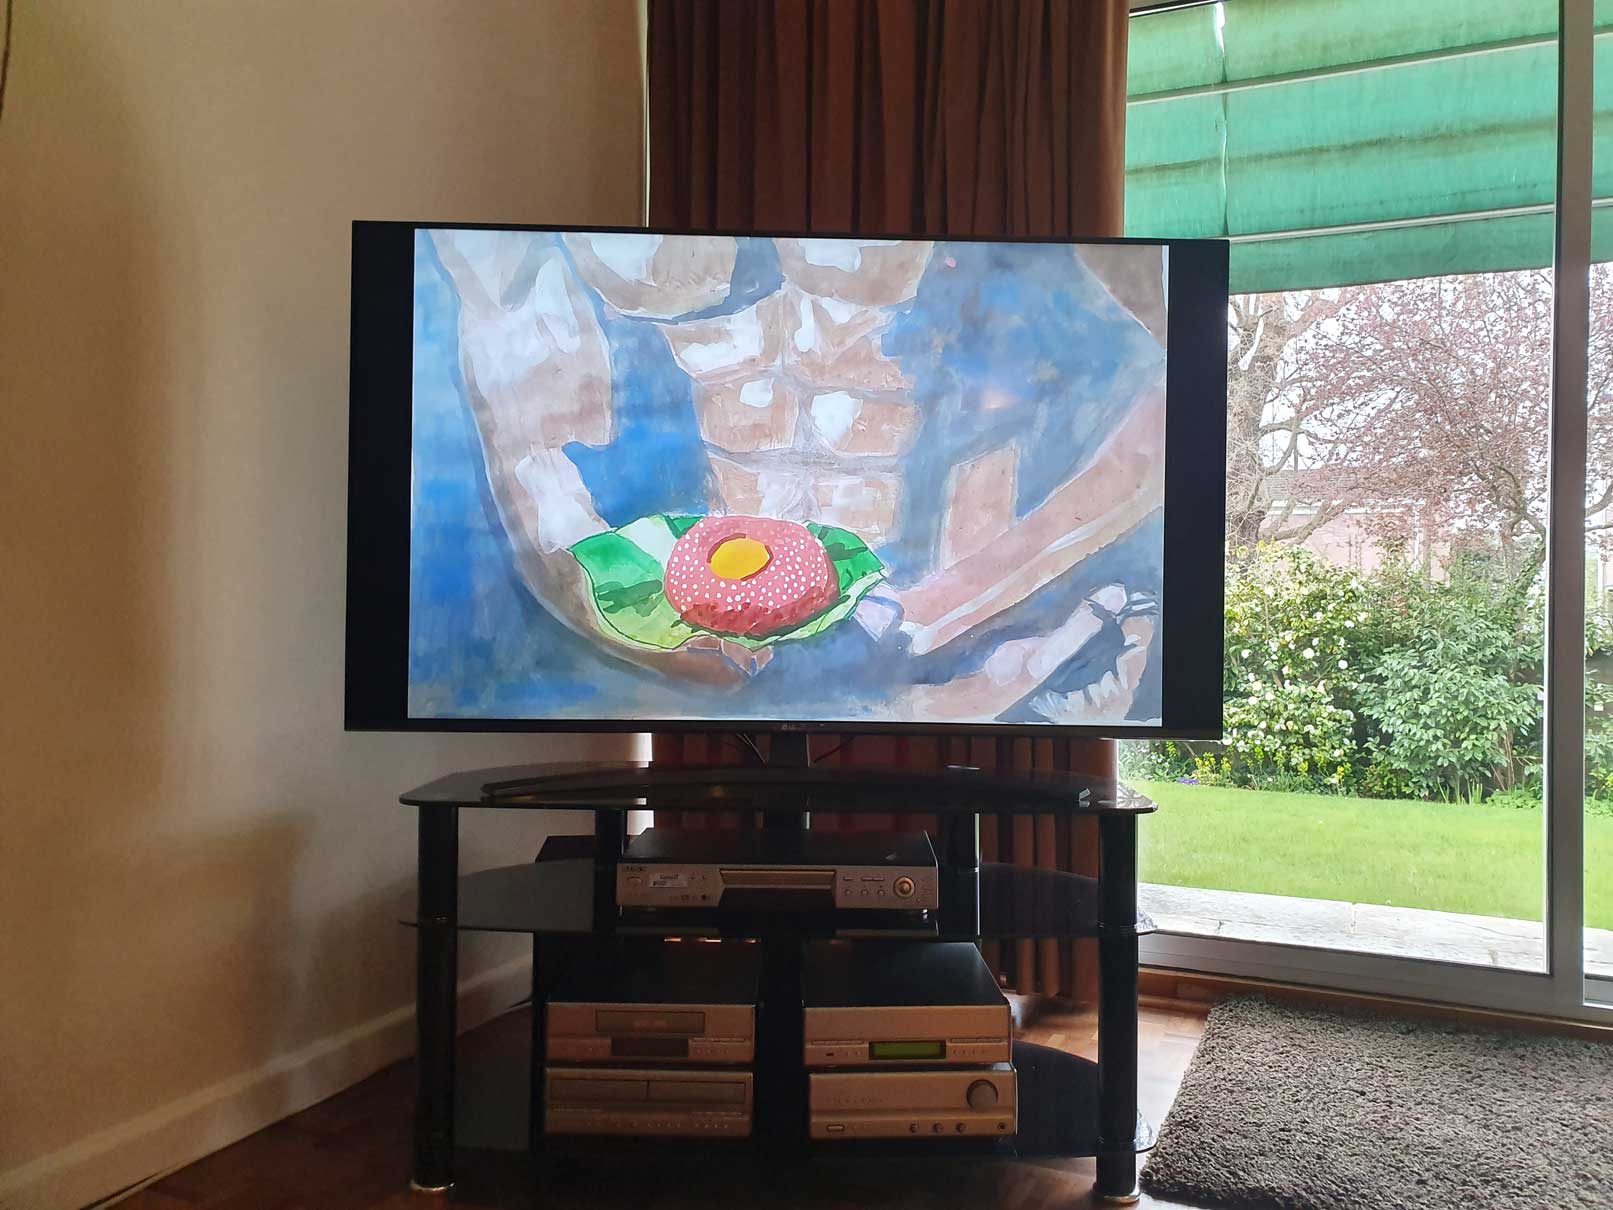 An image of a painting by the artist Alice Mendelowitz is displayed on a TV in the corner of a room, next to a glass sliding door that leads to a garden.